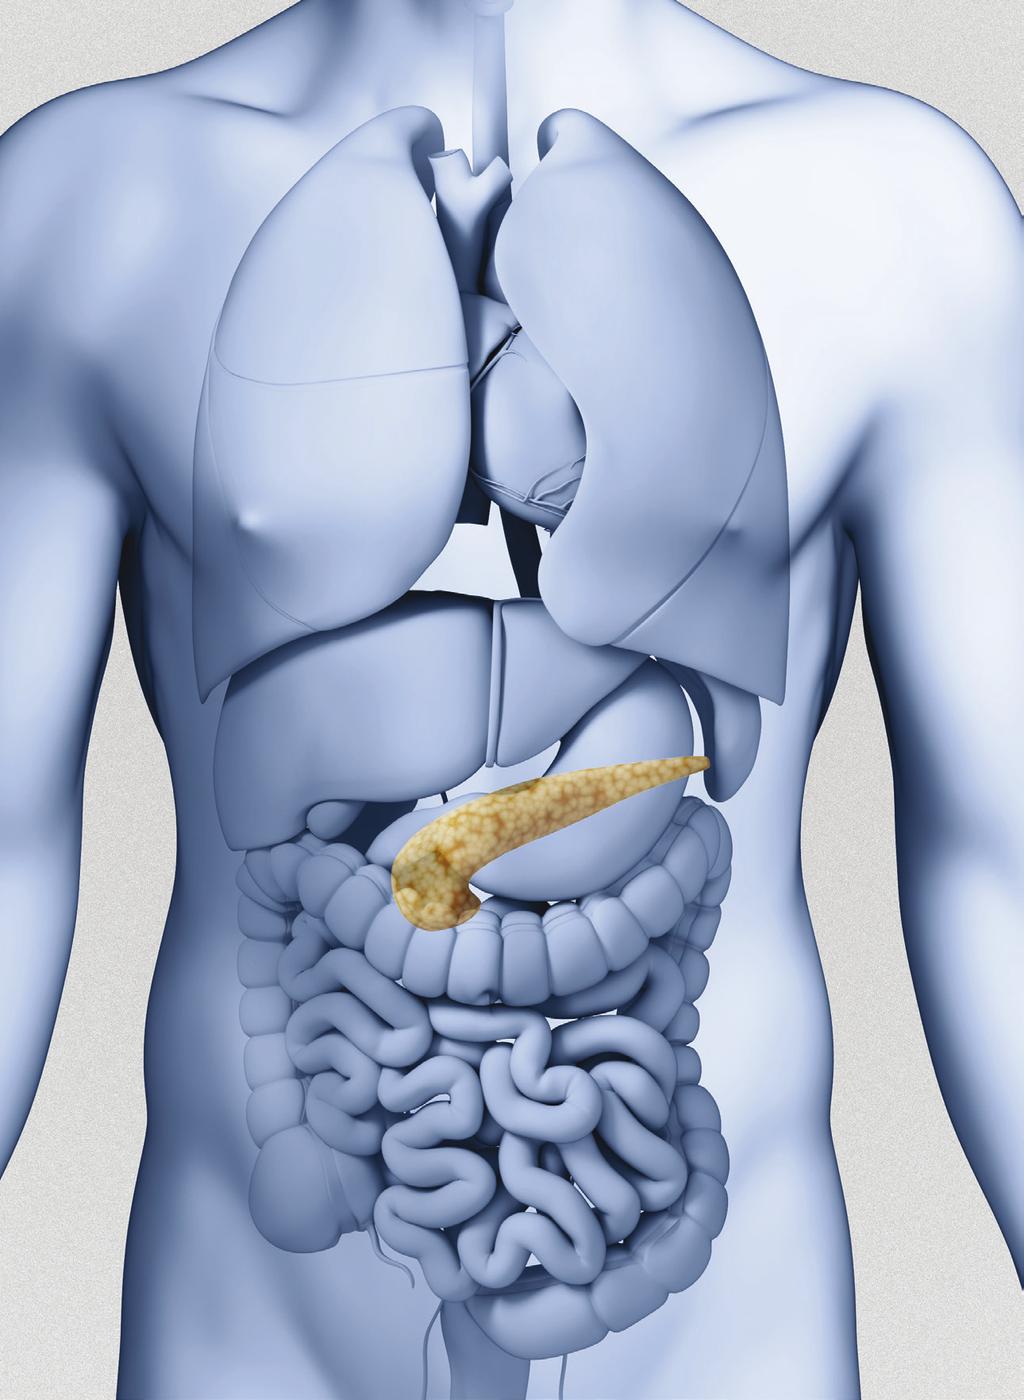 It can develop in some people who have1,5: Chronic pancreatitis (swelling of the pancreas